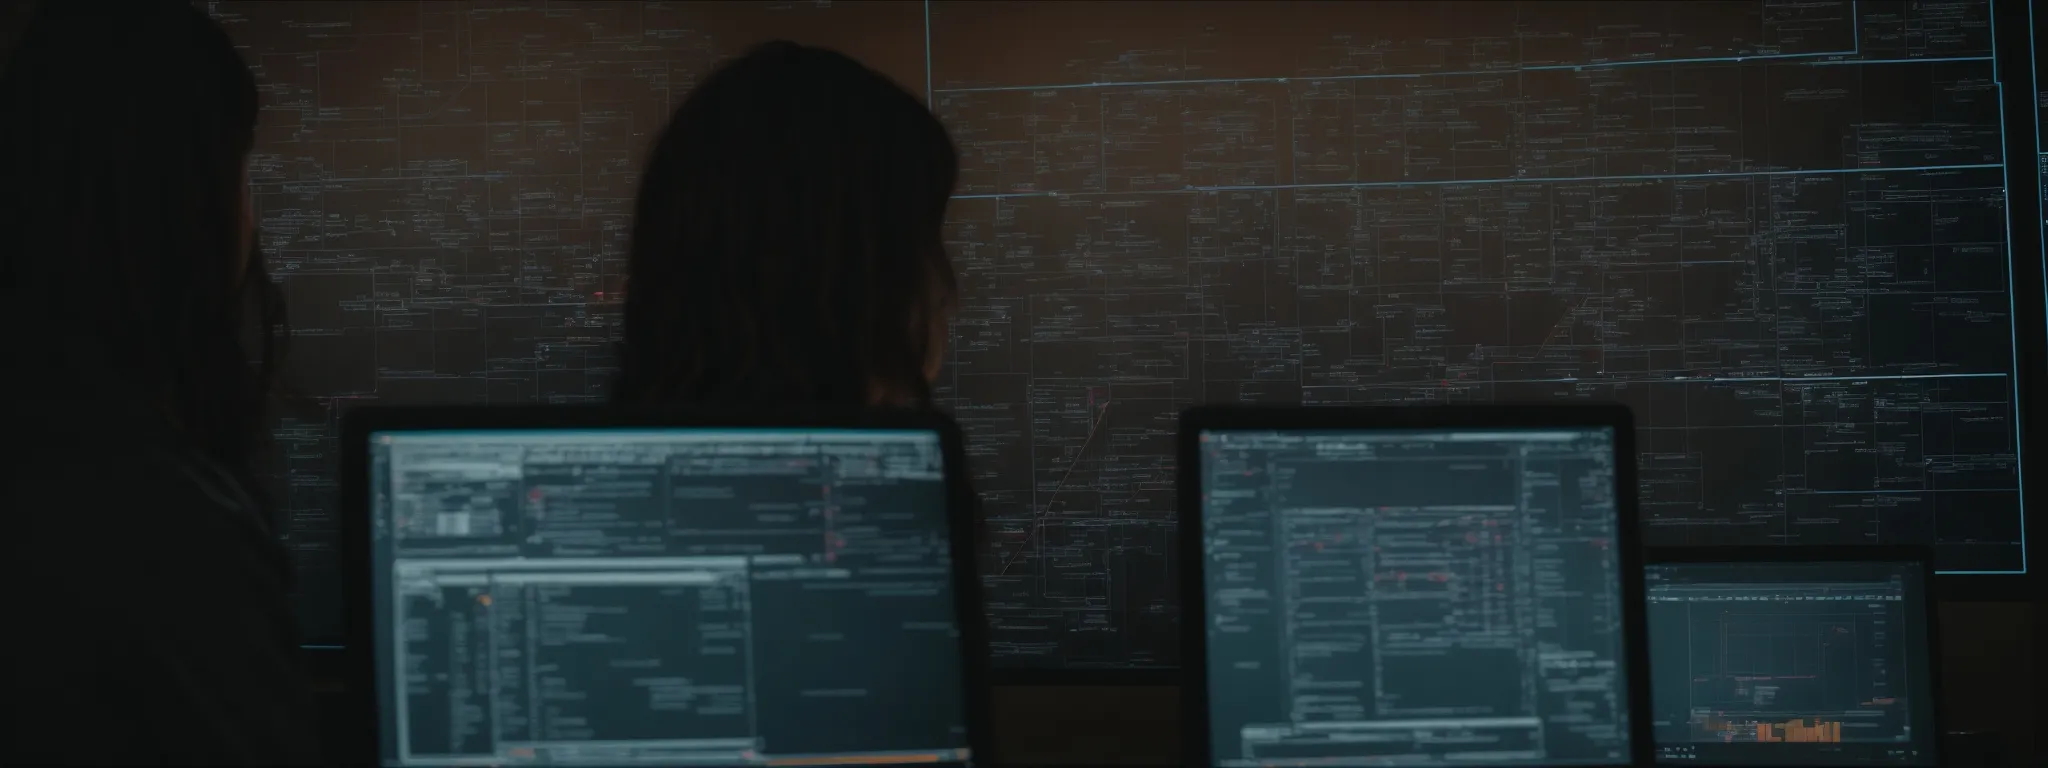 a person gazing intently at a computer screen surrounded by complex flowcharts and diagrammatic representations of algorithms.